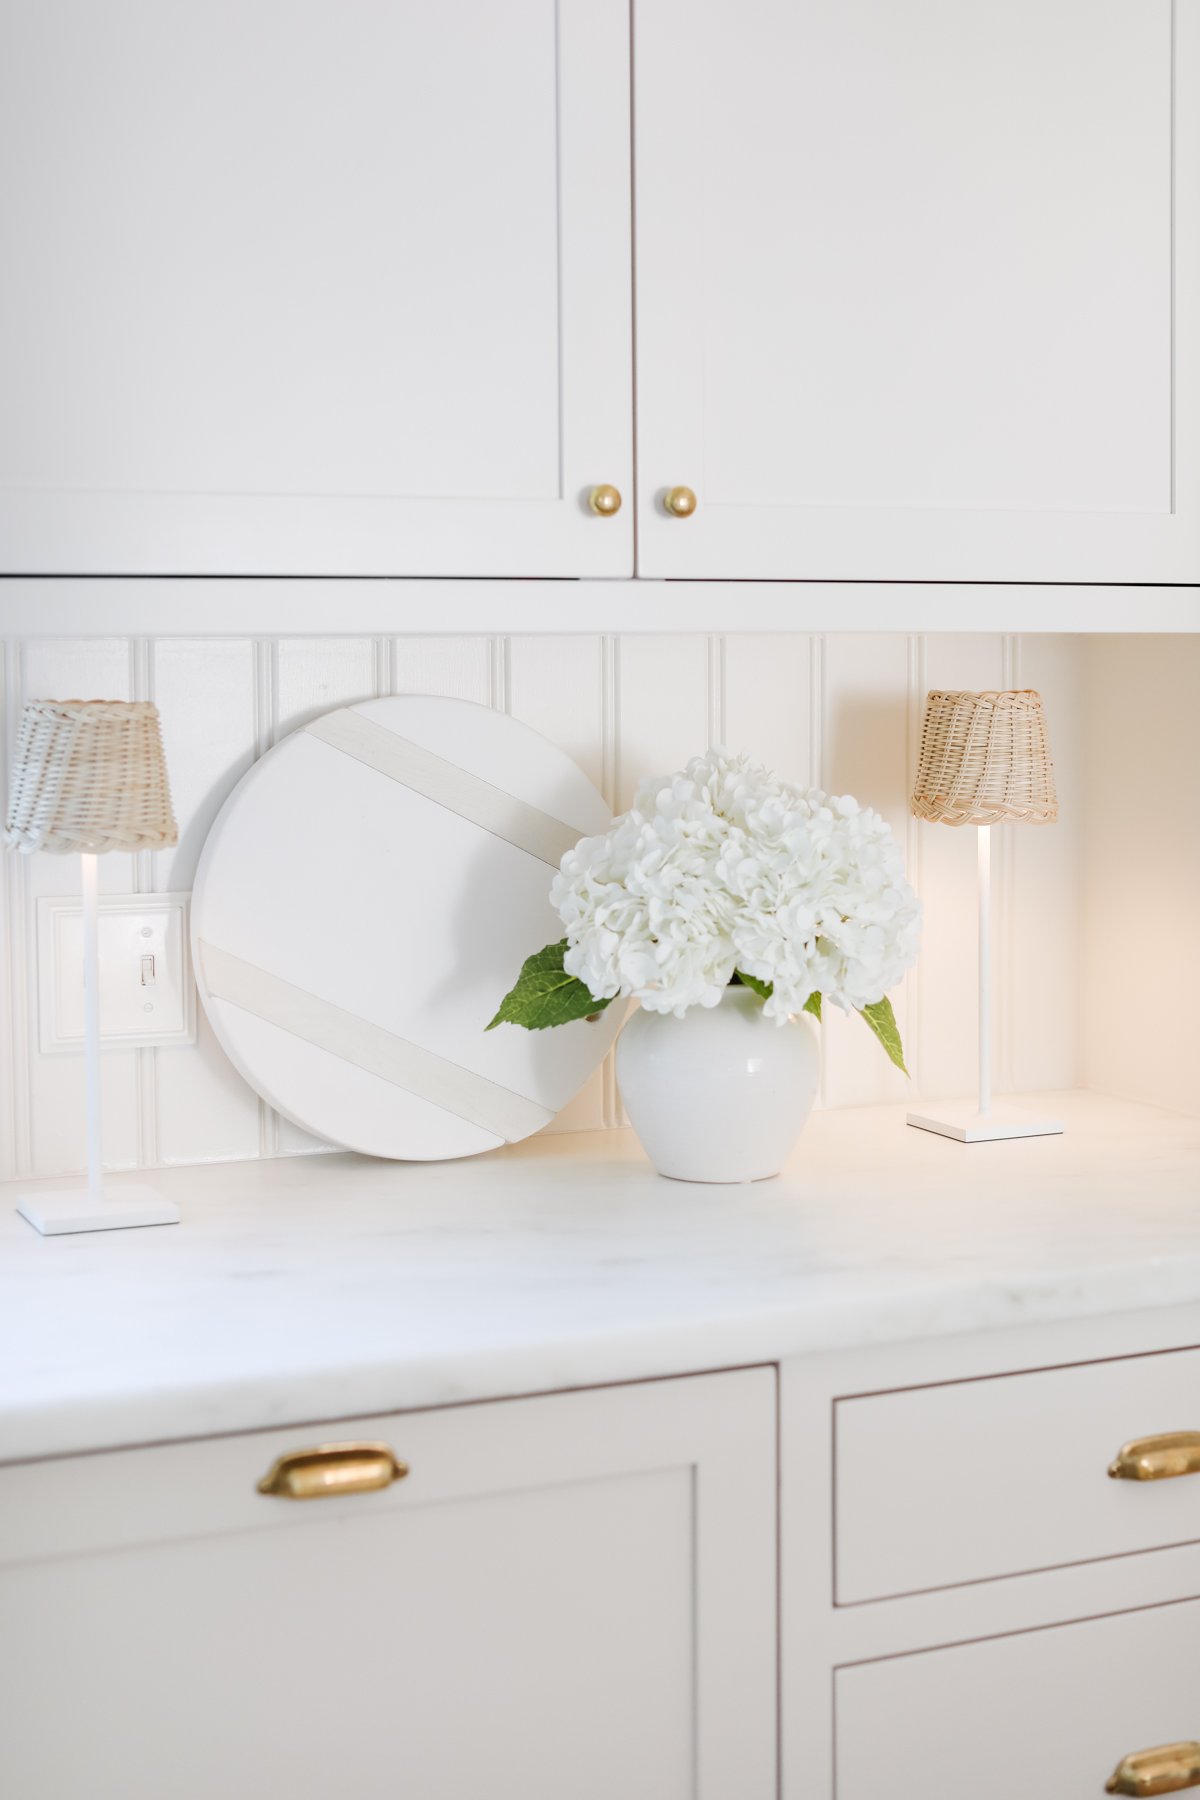 A kitchen with led lamps, a vase of hydrangea and a white charcuterie board on the countertop.